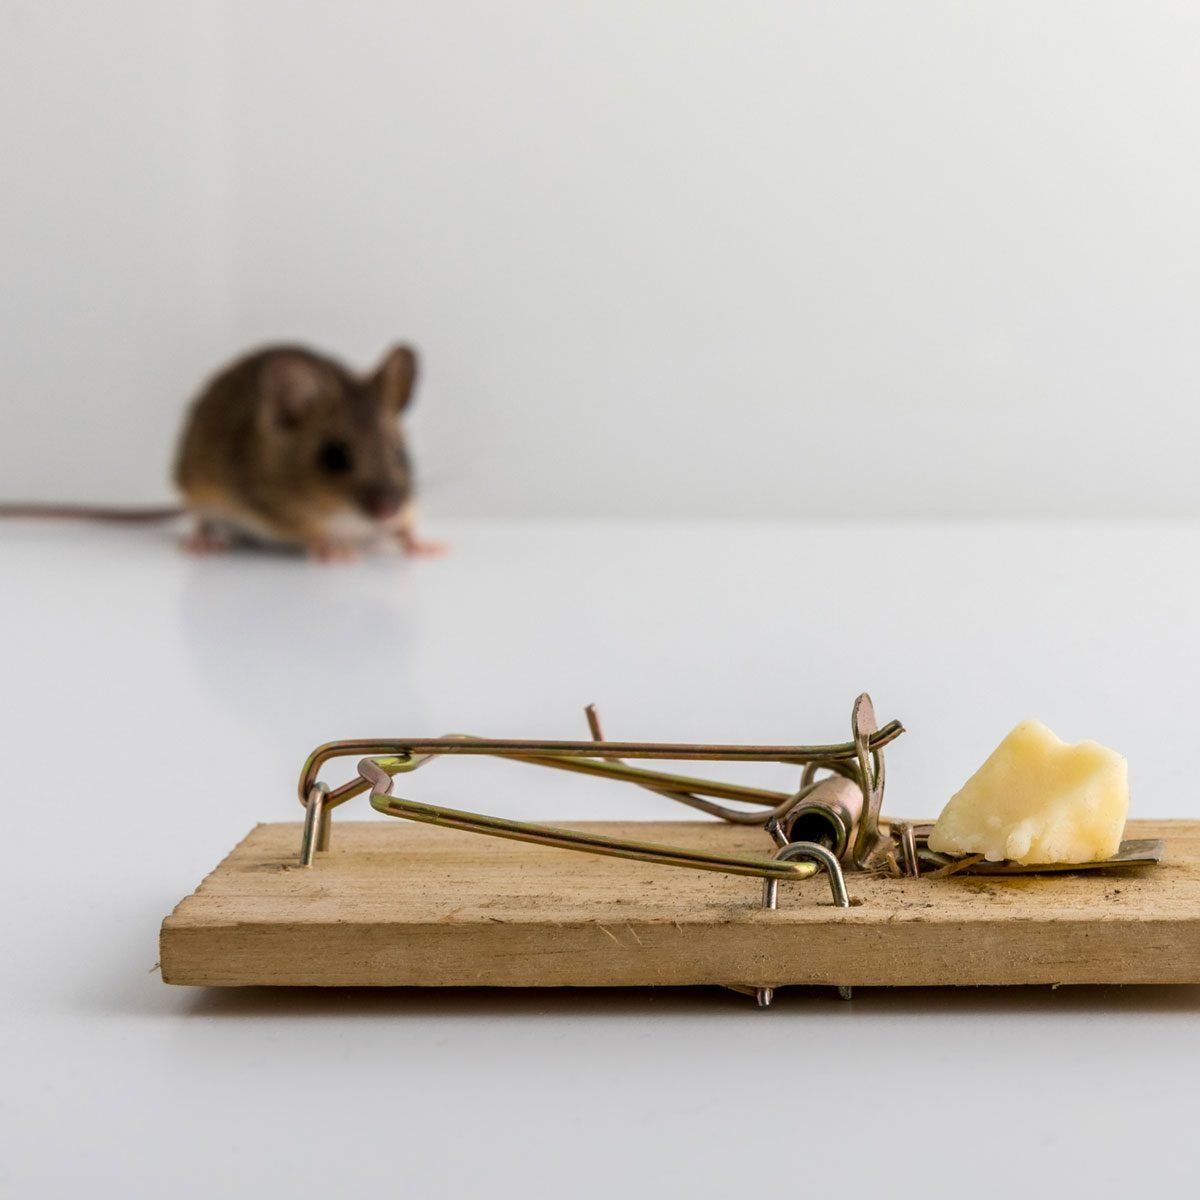 mouse-trap-with-cheese-GettyImages-1030568128.jpg